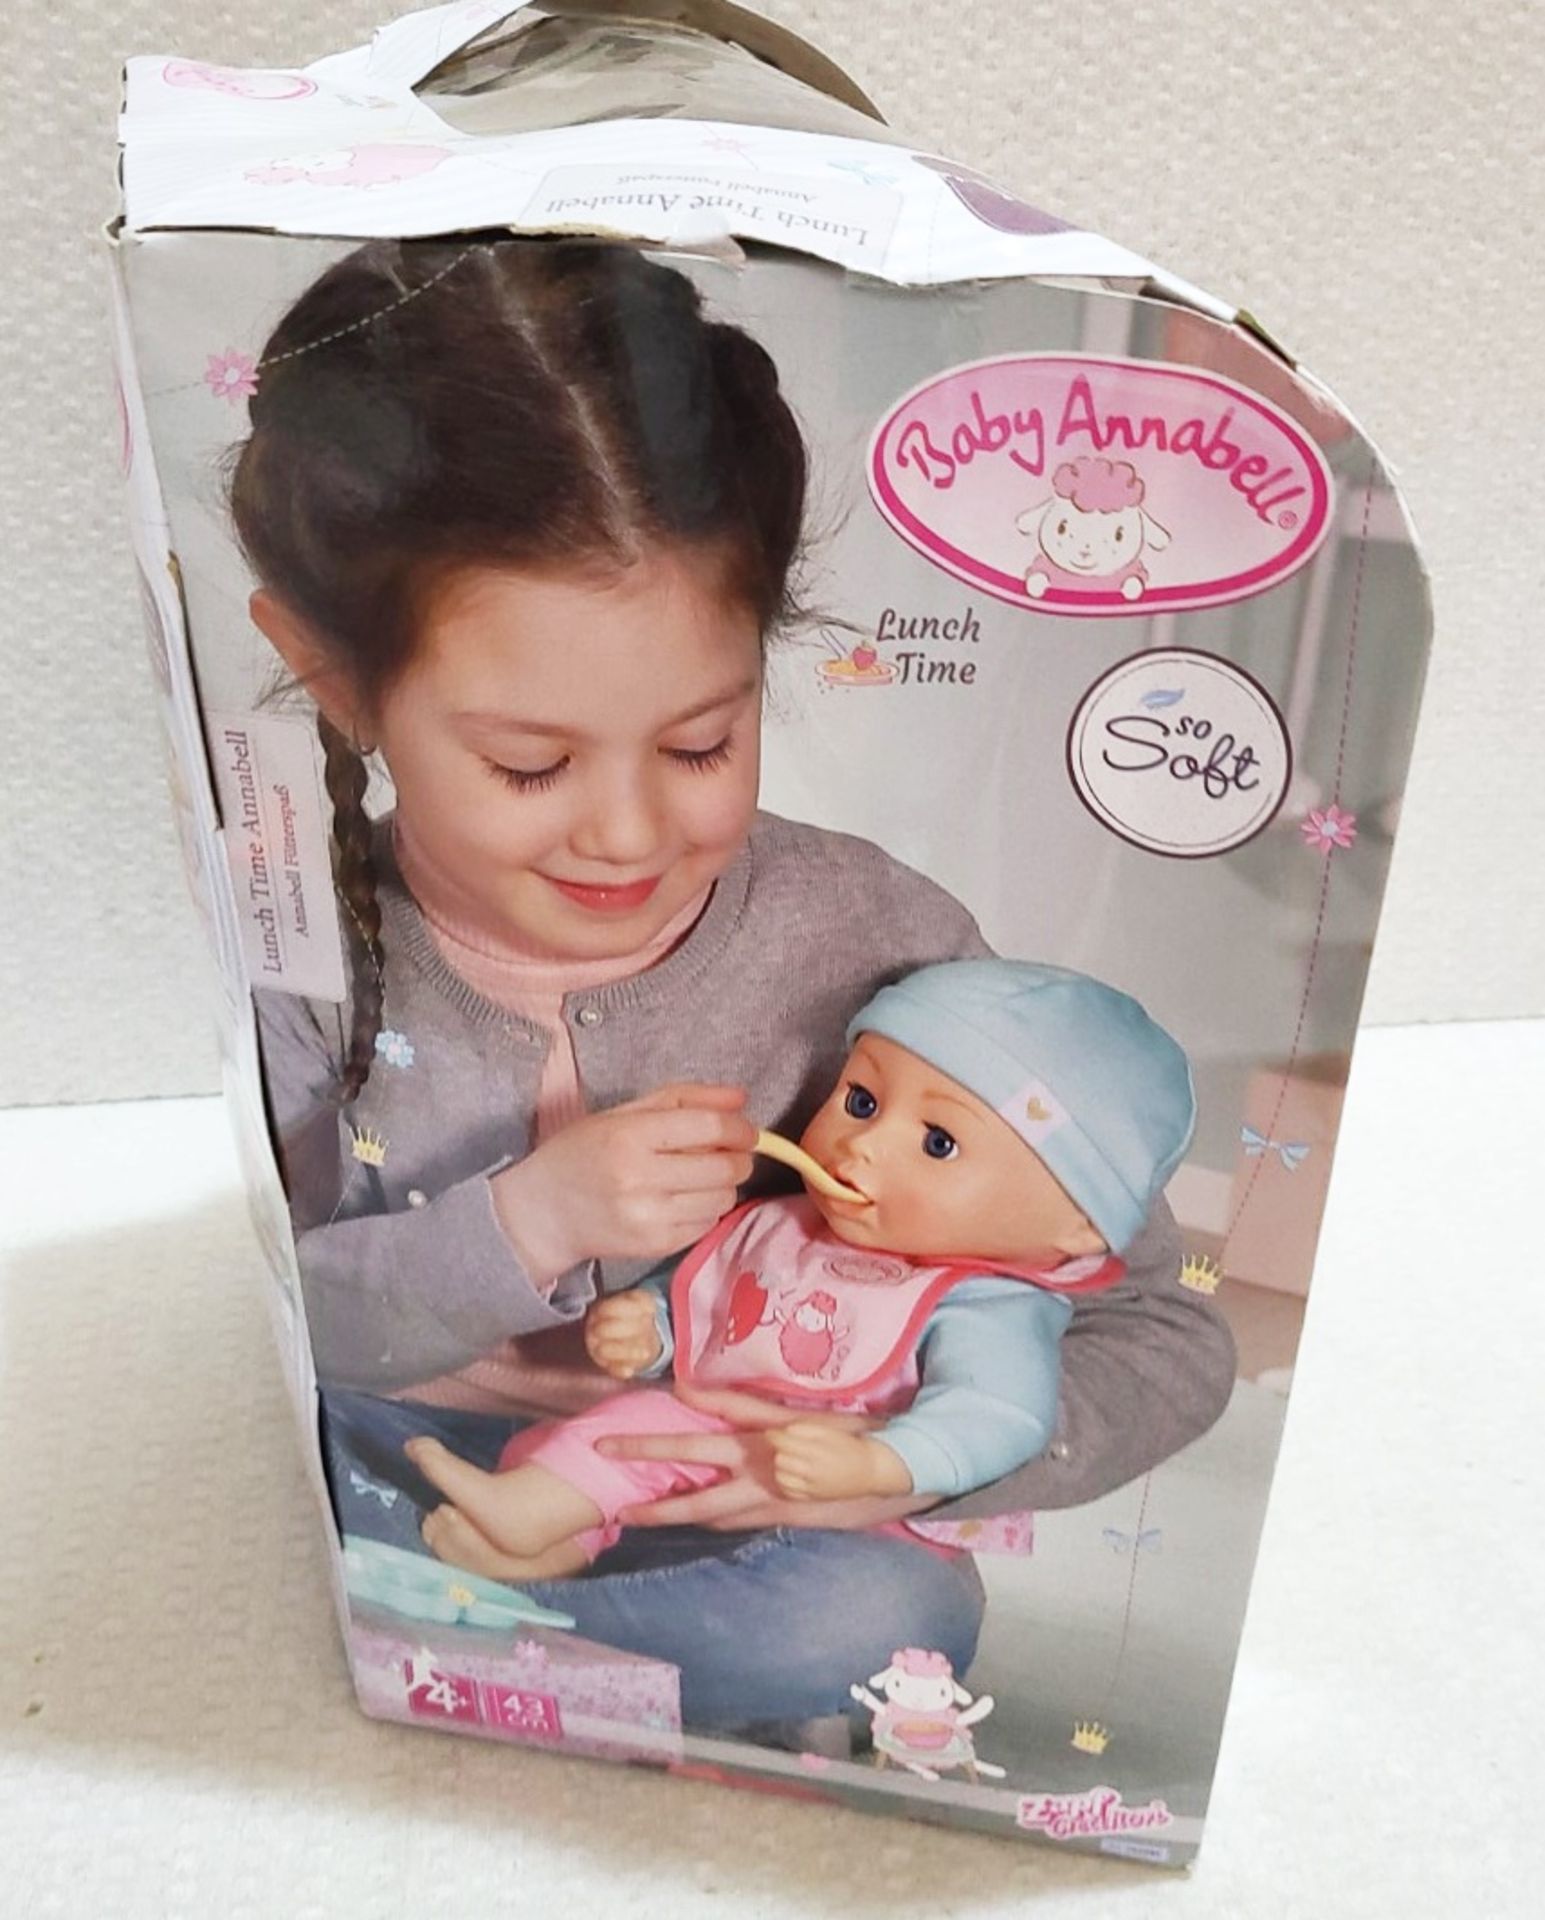 1 x BABY ANNABEL Lunchtime Baby With Accessories - Original Price £59.95 - Unused Boxed Stock - Ref: - Image 3 of 4